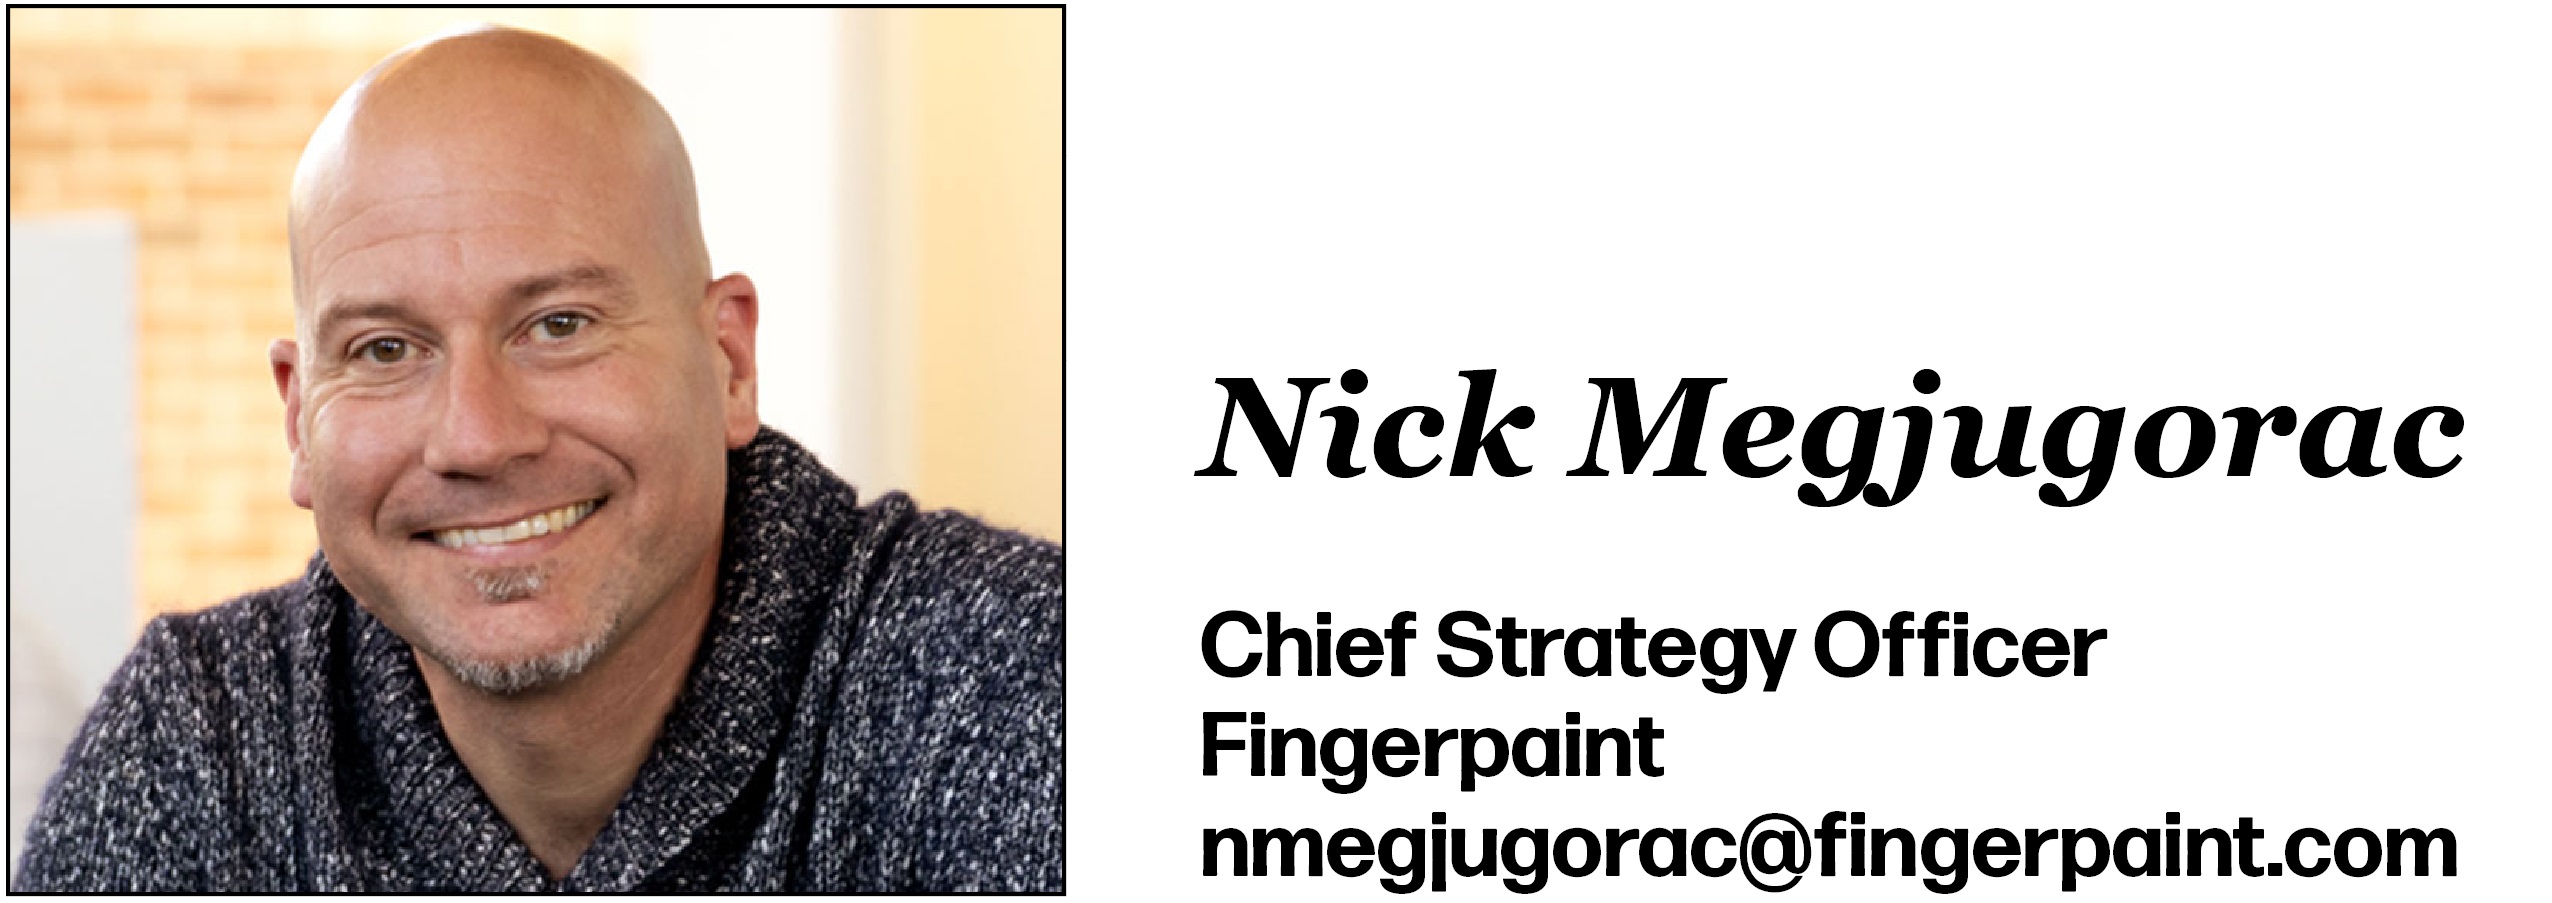 Nick Megjugorac is Chief Strategy Officer at Fingerpaint. His email is nmegjugorac@fingerpaint.com.